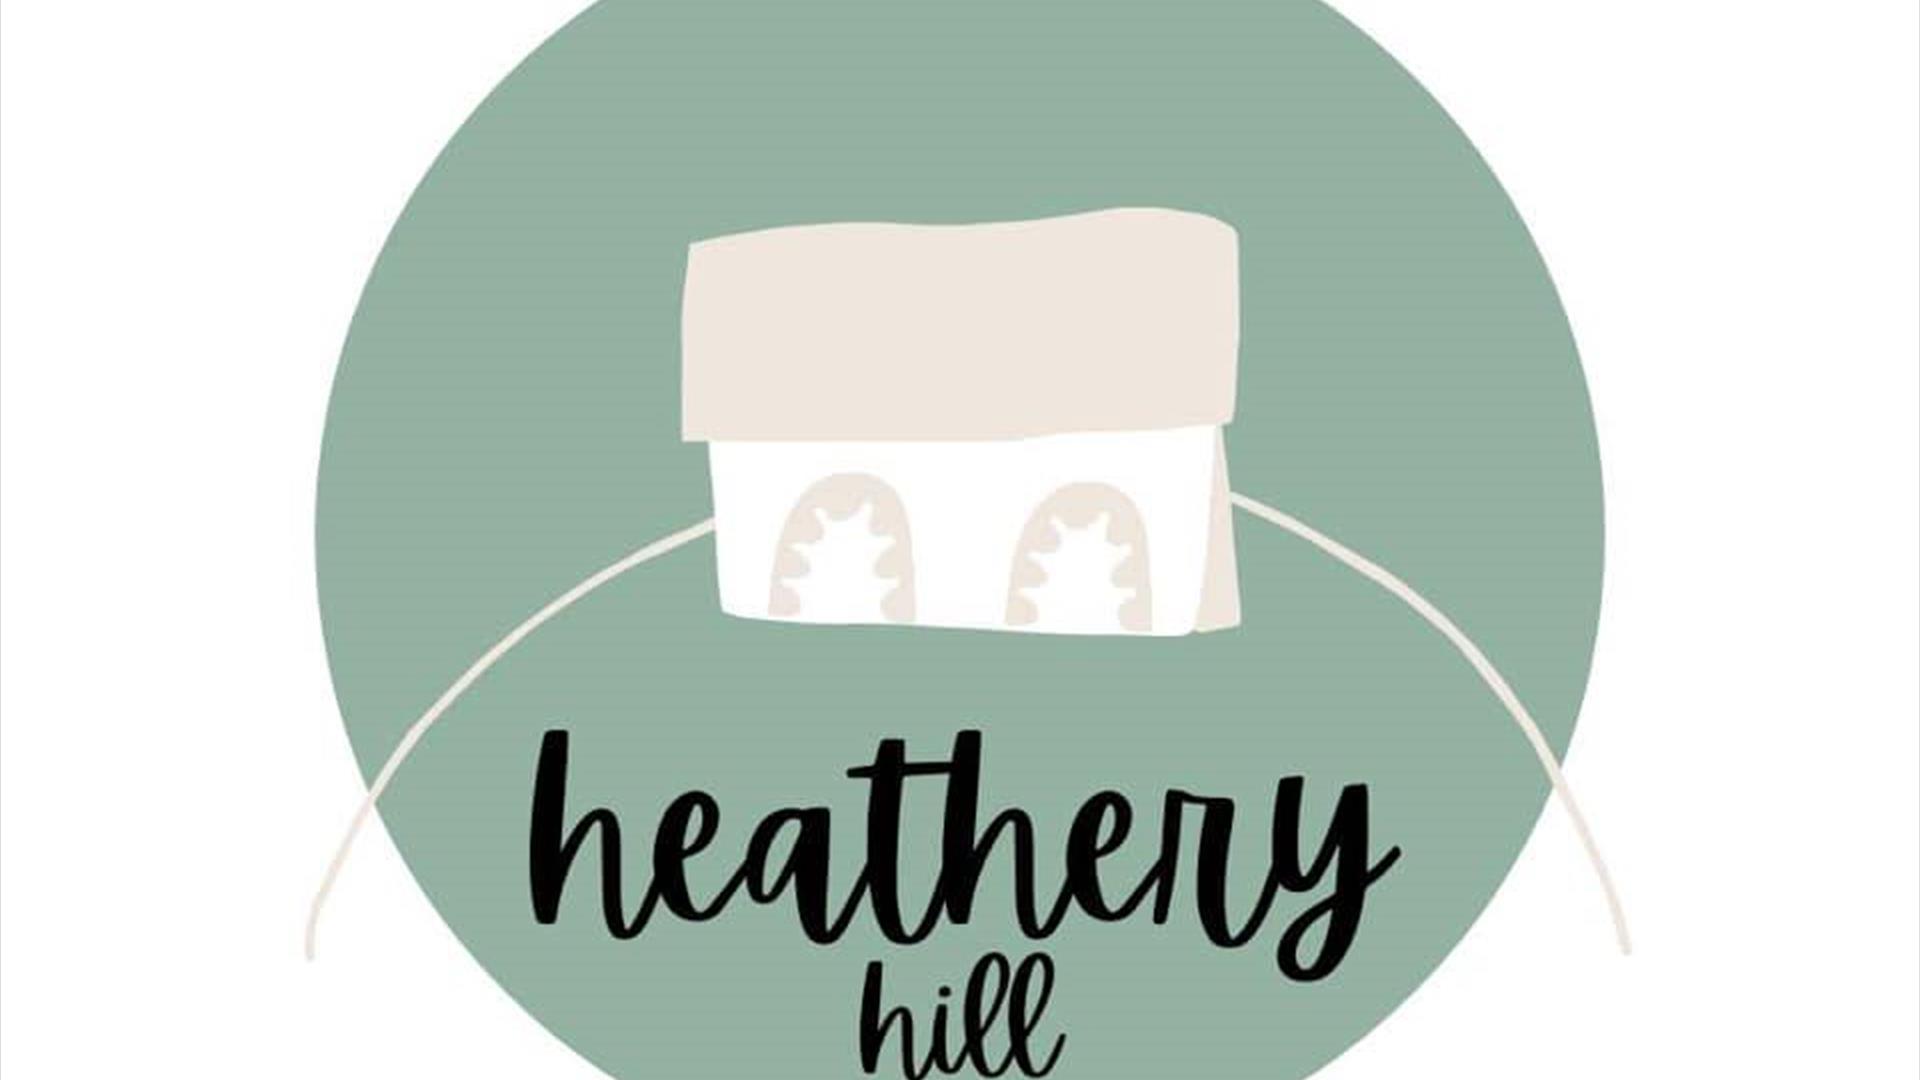 Images shows logo of heathery hill which is a small house within a green circle